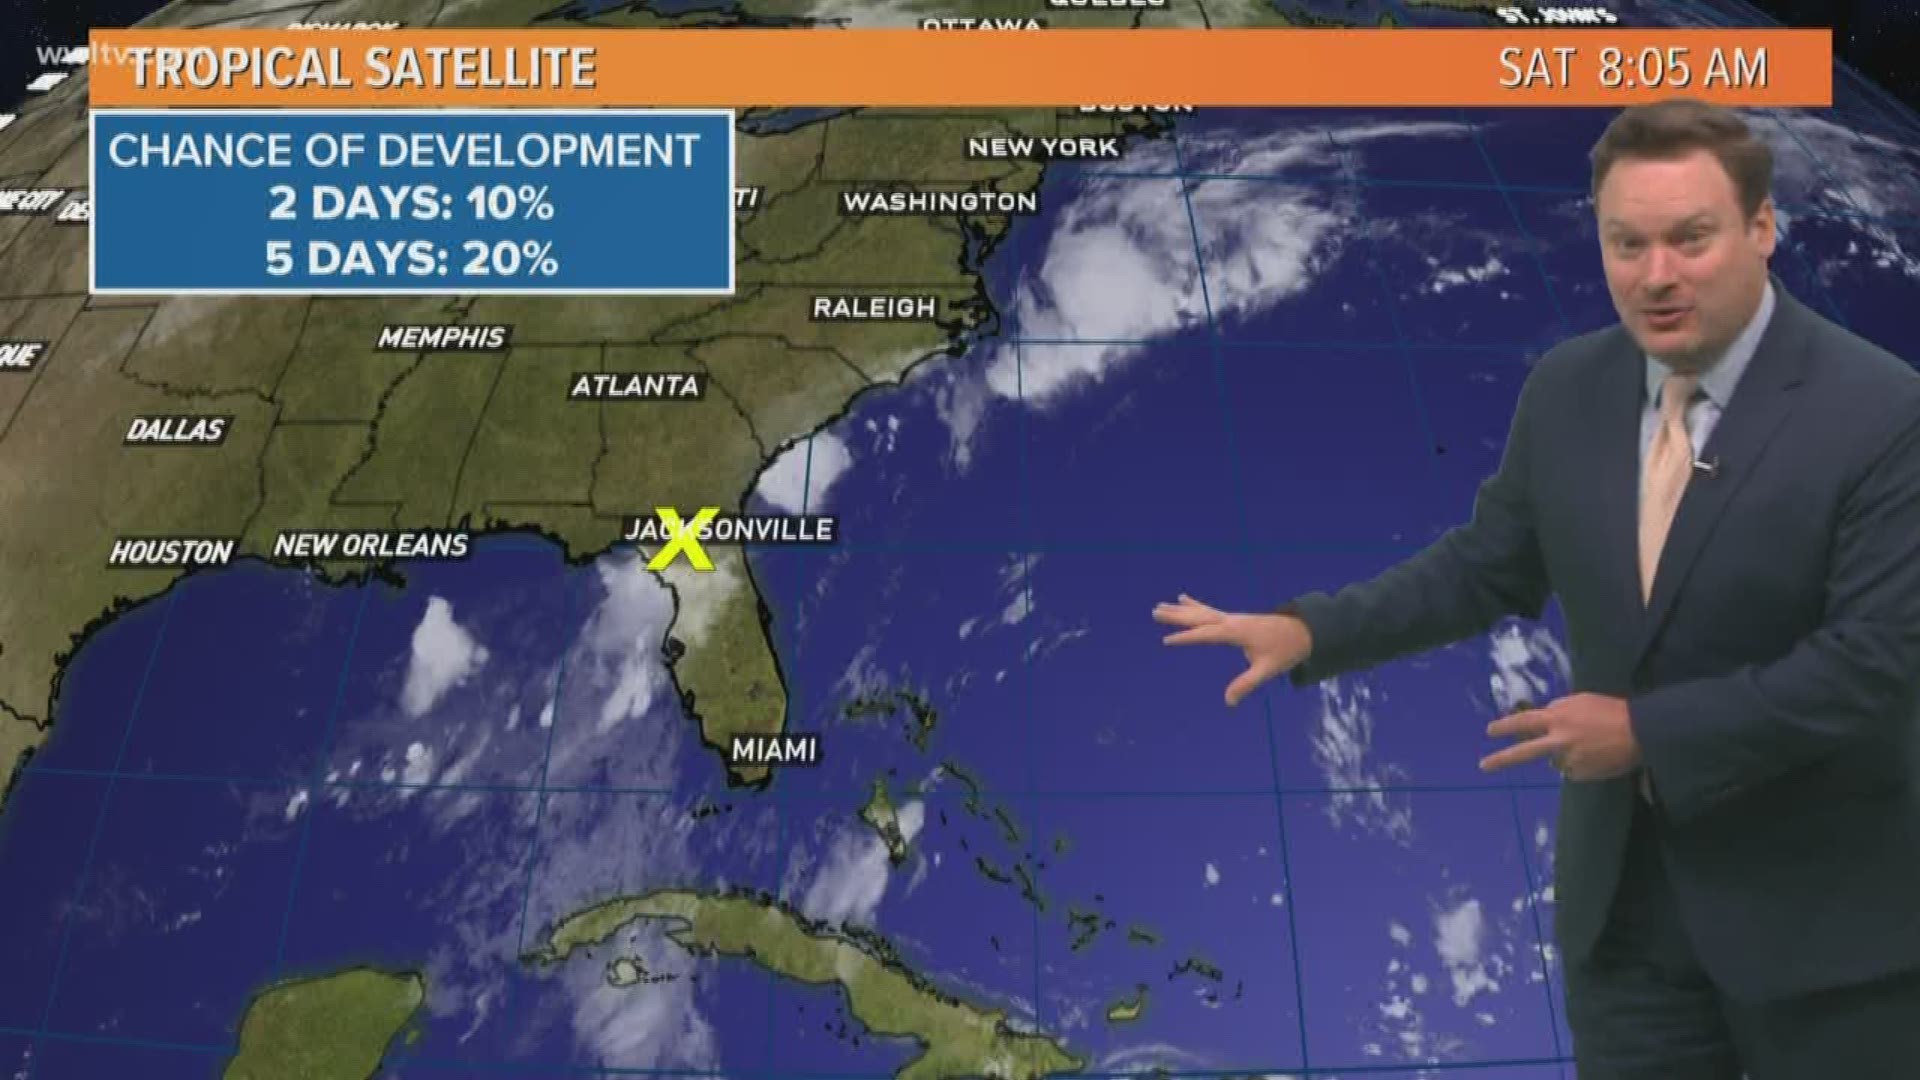 Meteorologist Chris Franklin has a look at the quiet tropics but a wave moving through the Caribbean may enter the Gulf next week.